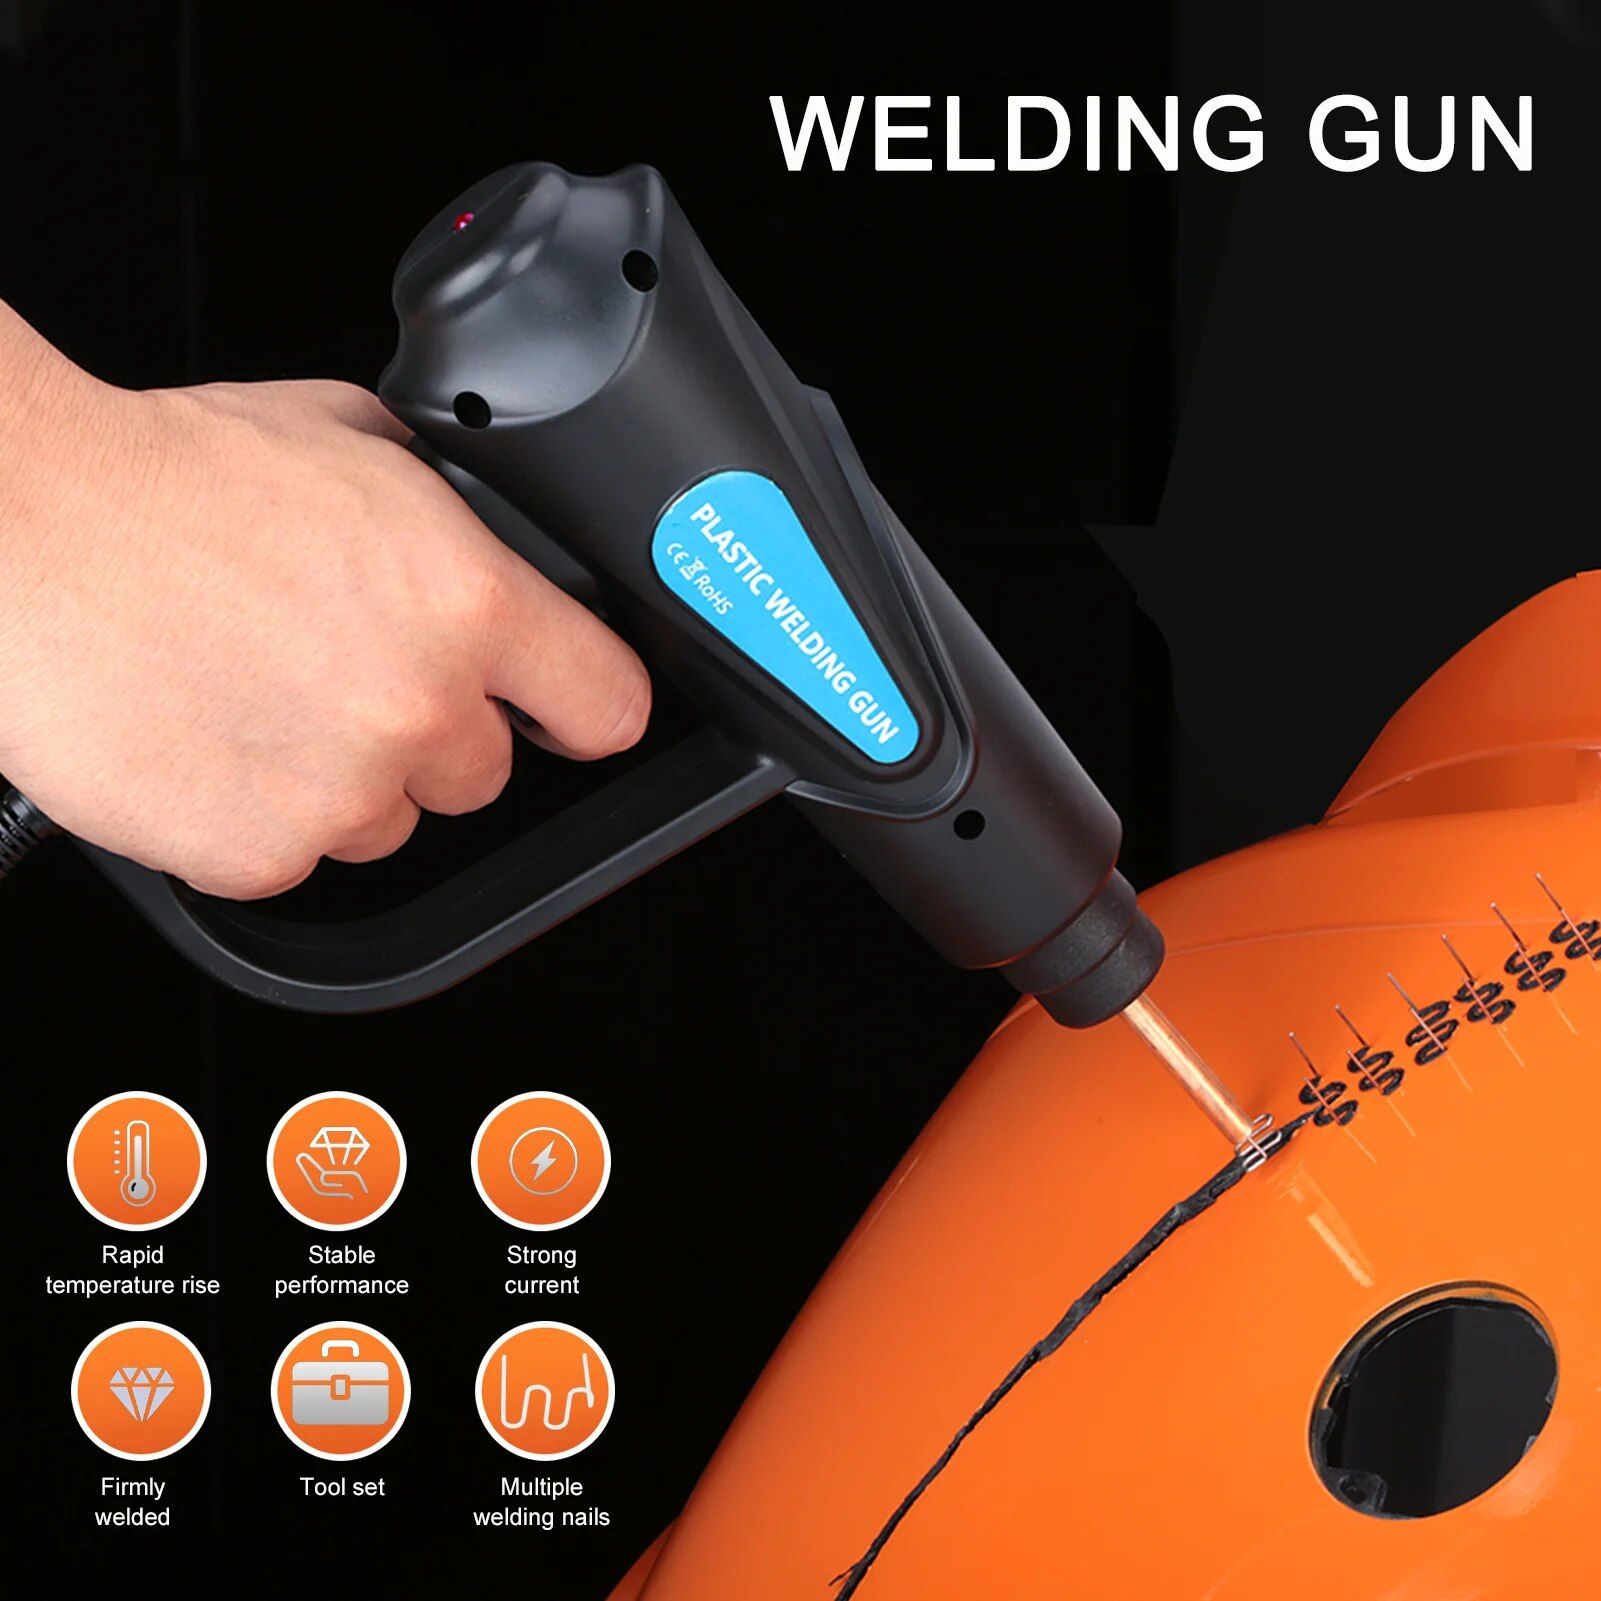 Multi-Functional 70W Plastic Welding Kit for Automotive Repairs 